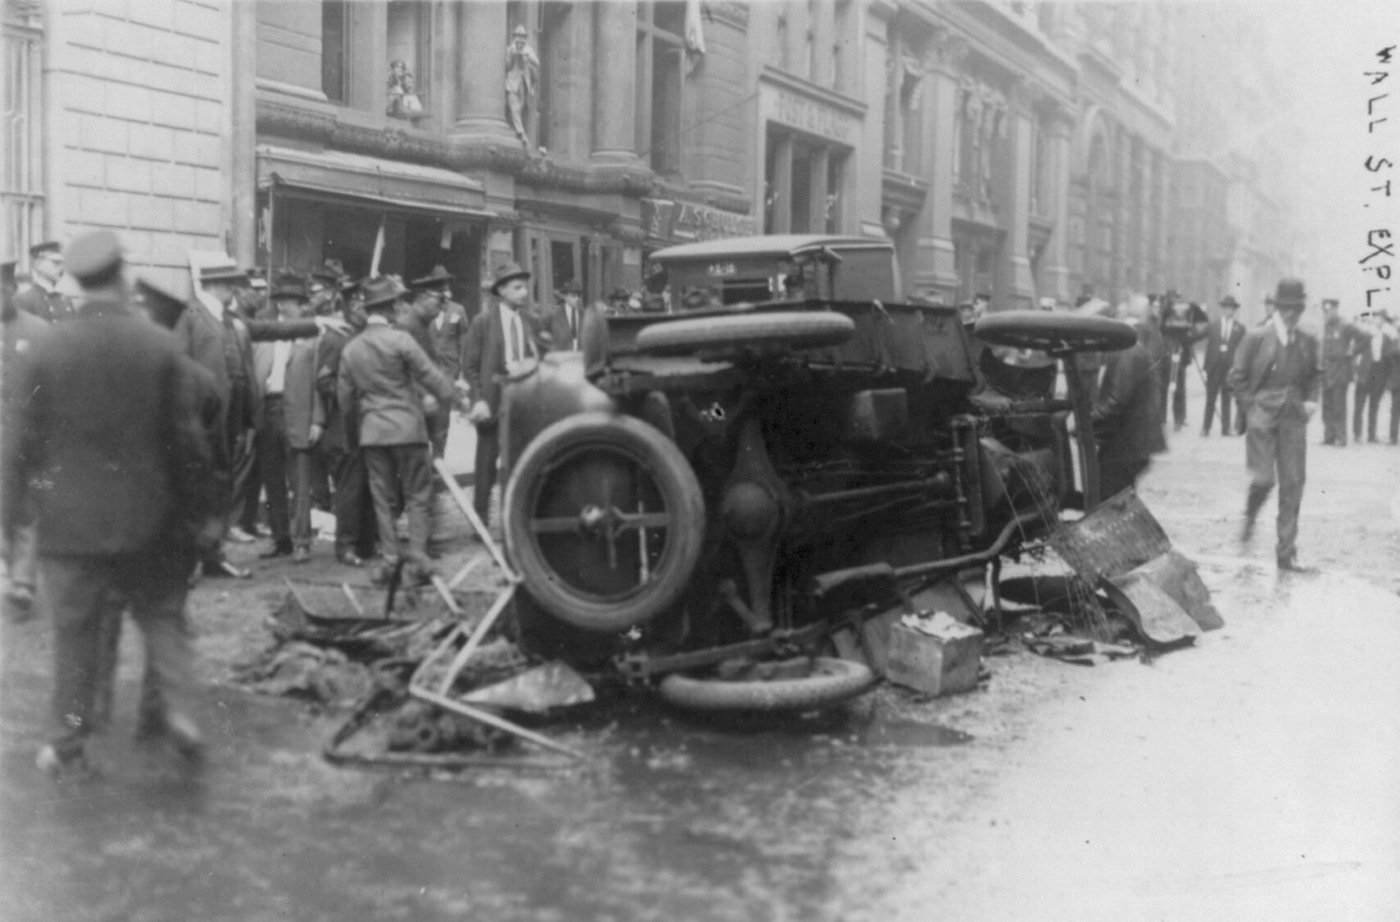 Wall Street Bombing in 1920 (Library of Congress)